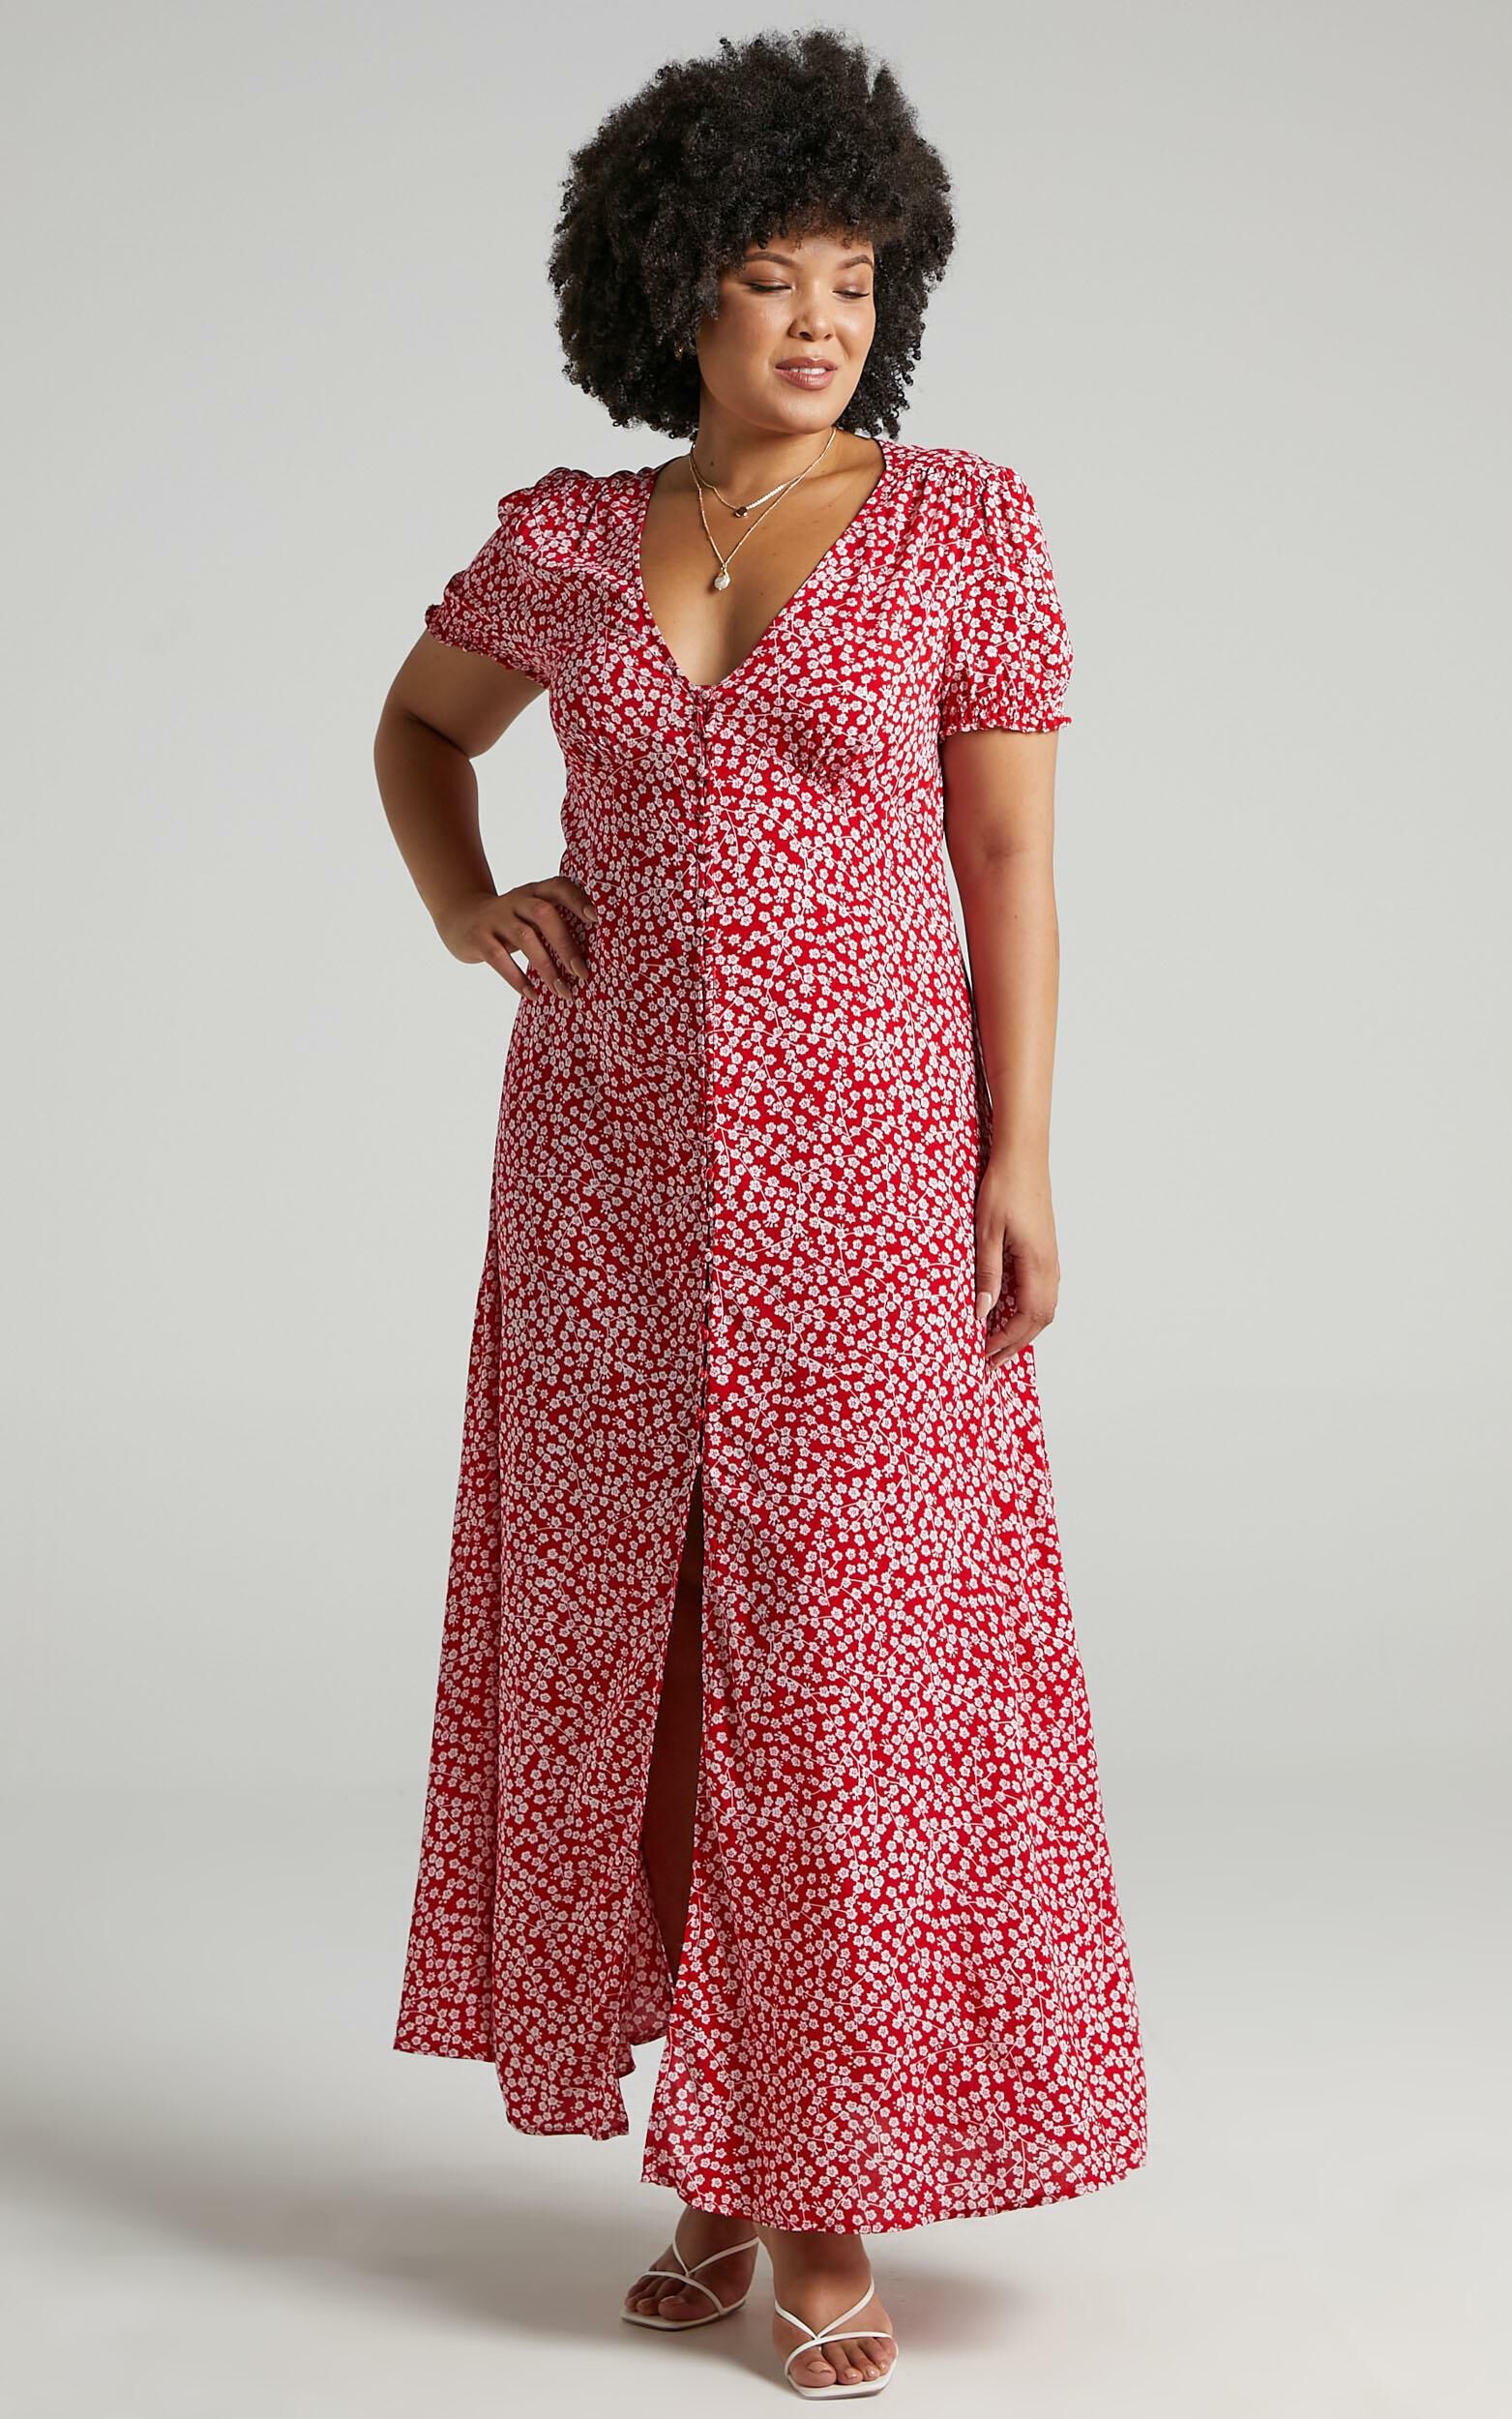 Flaming Hot Button Up V Neck Maxi Dress in Red Floral - 04, RED3, super-hi-res image number null